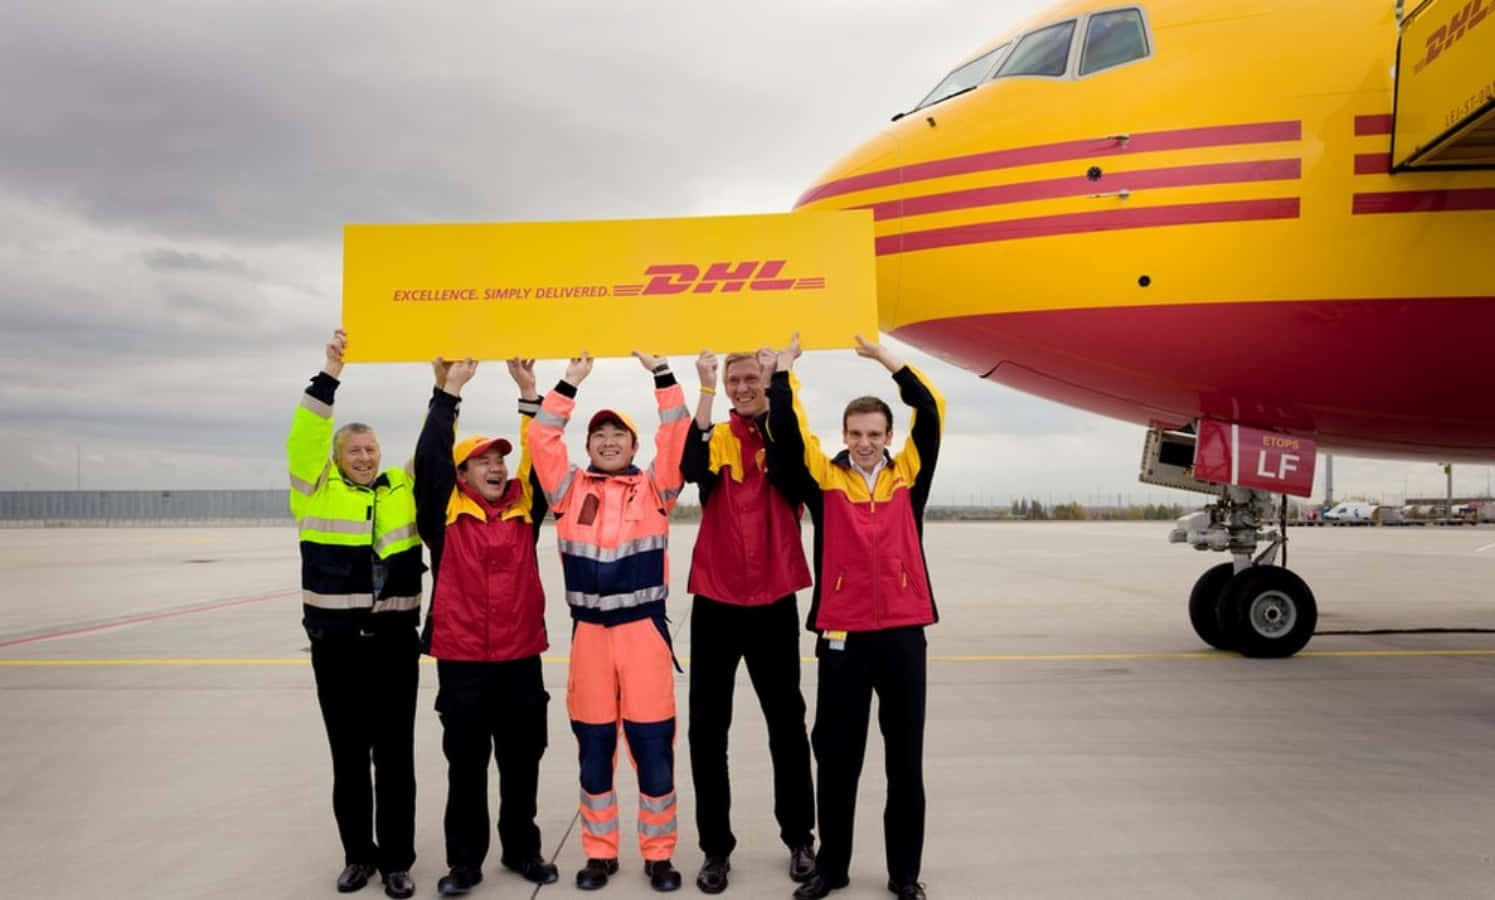 Get your package delivered safely and reliably with DHL